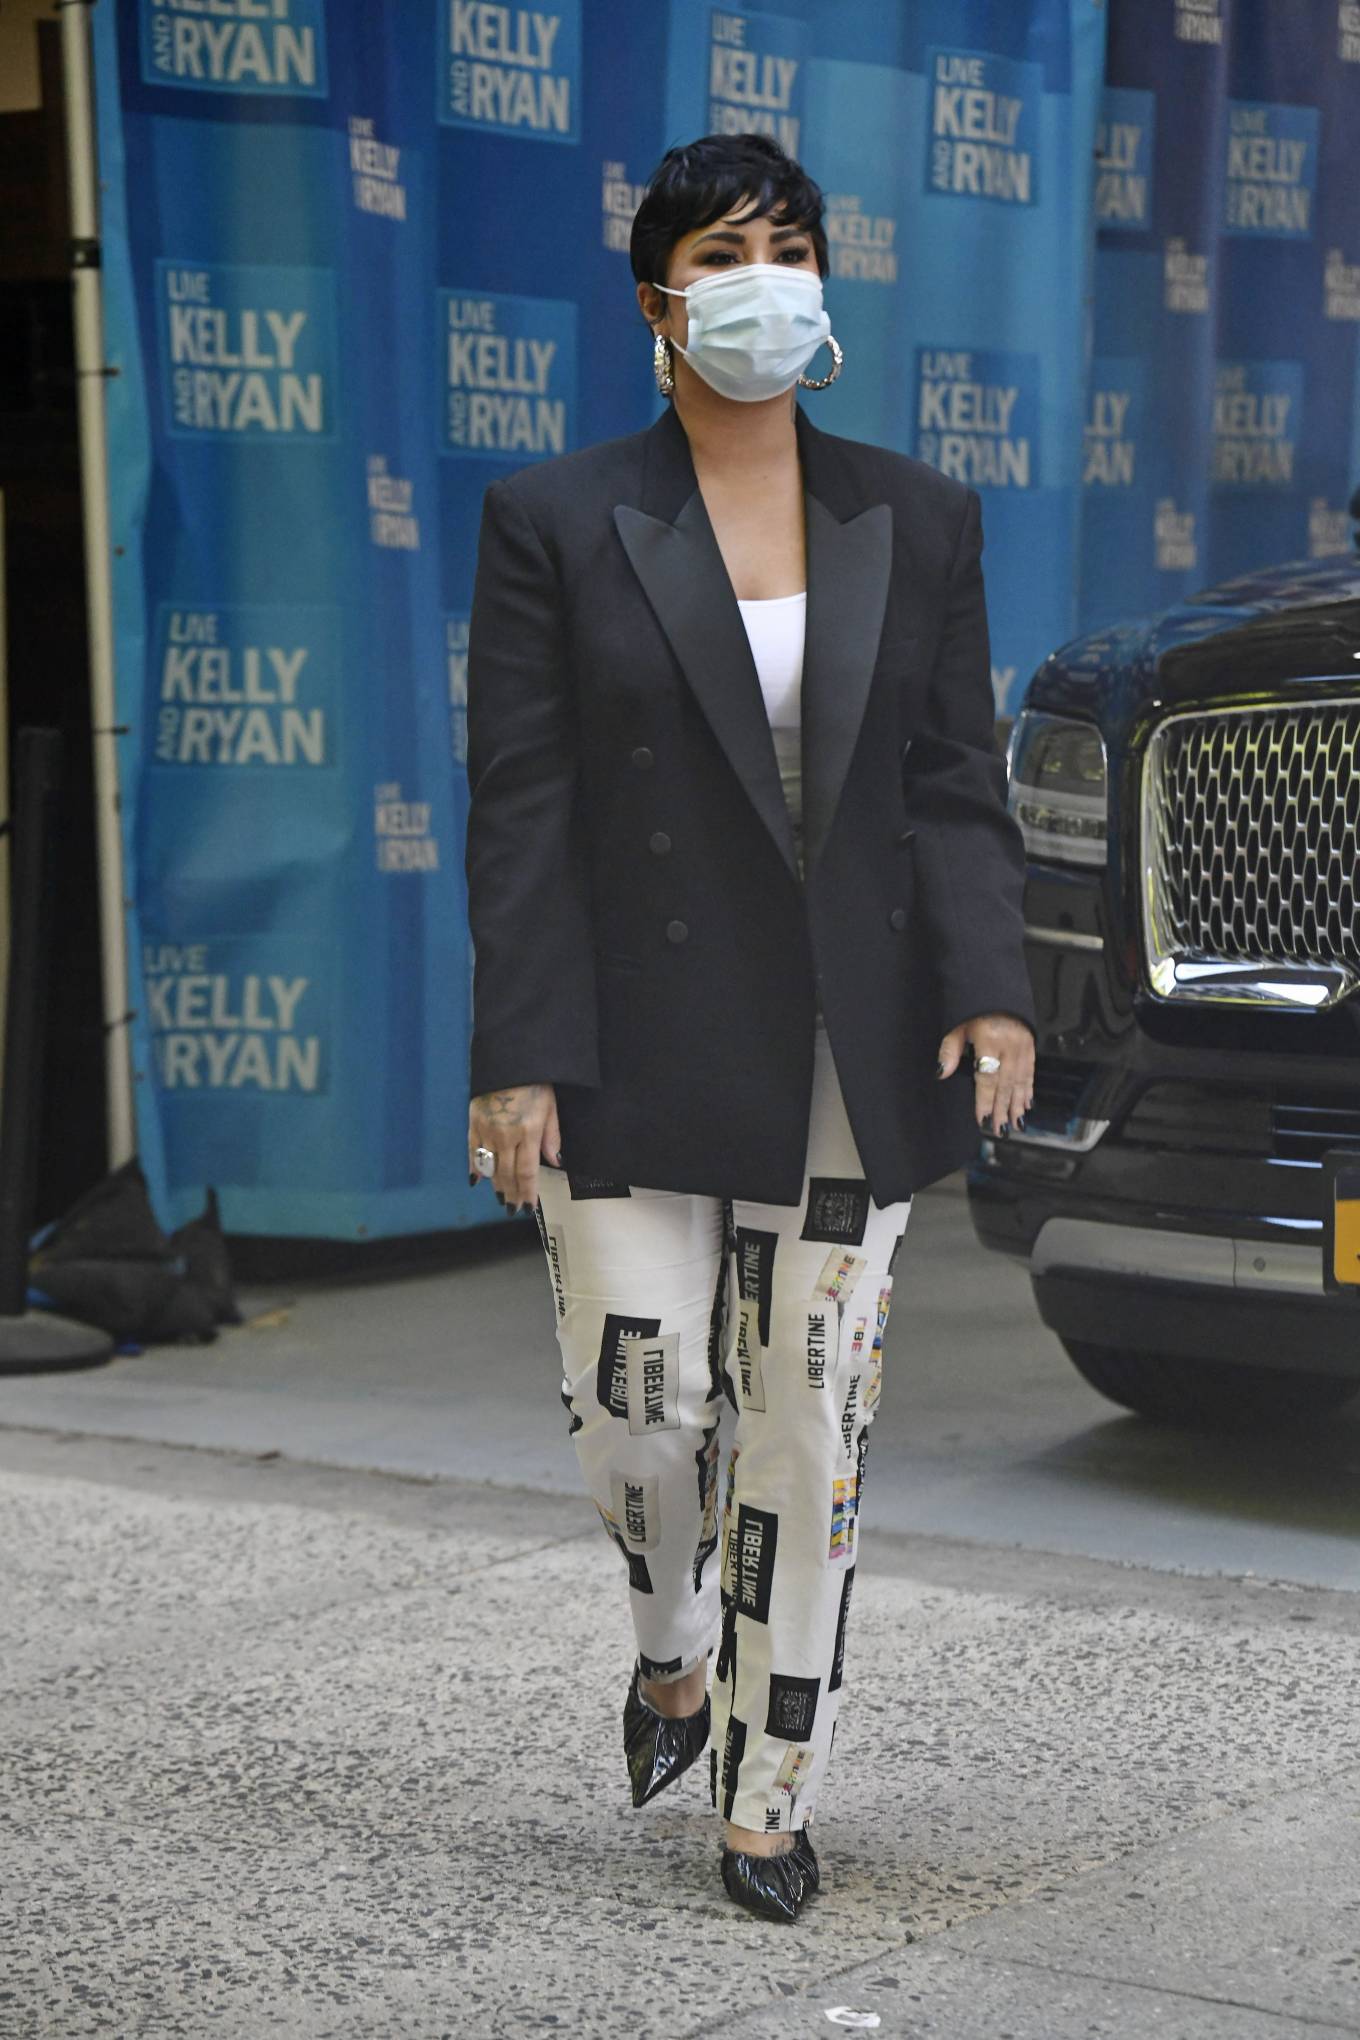 Demi Lovato 2021 : Demi Lovato – Outside the Live with Kelly and Ryan show in New York-05